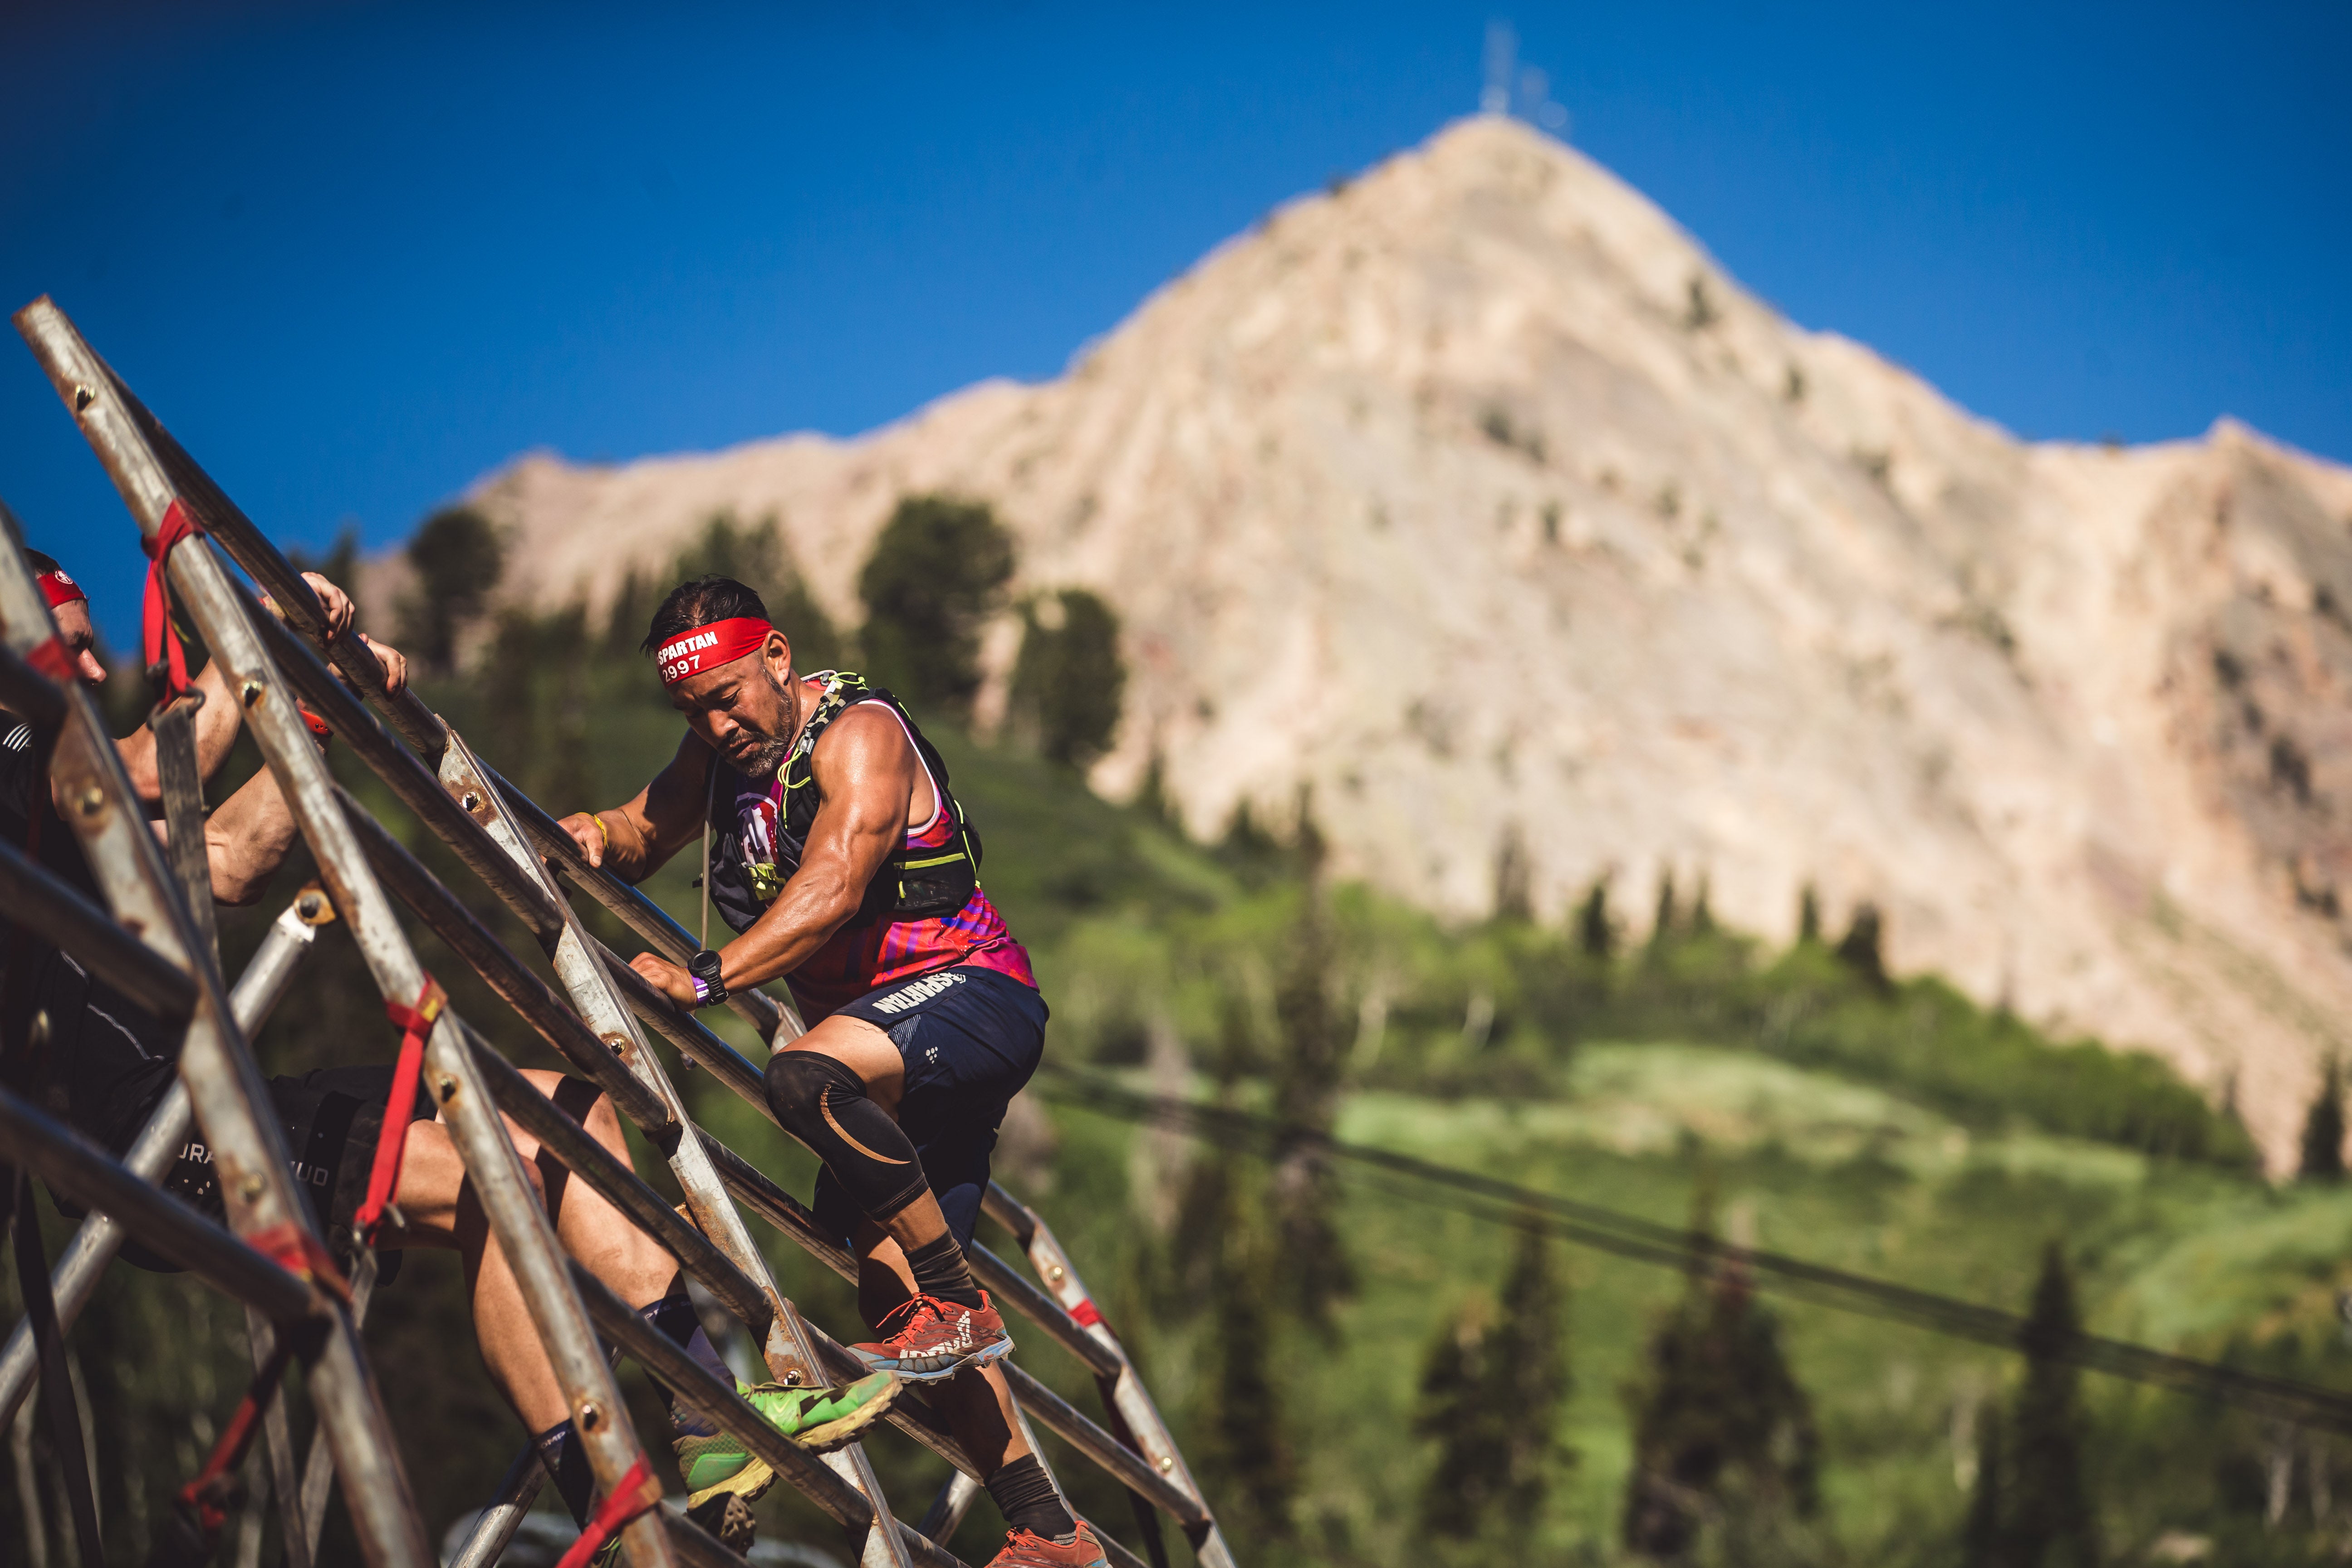 a racer climbs over the A Frame cargo in front of a mountain during a Spartan race